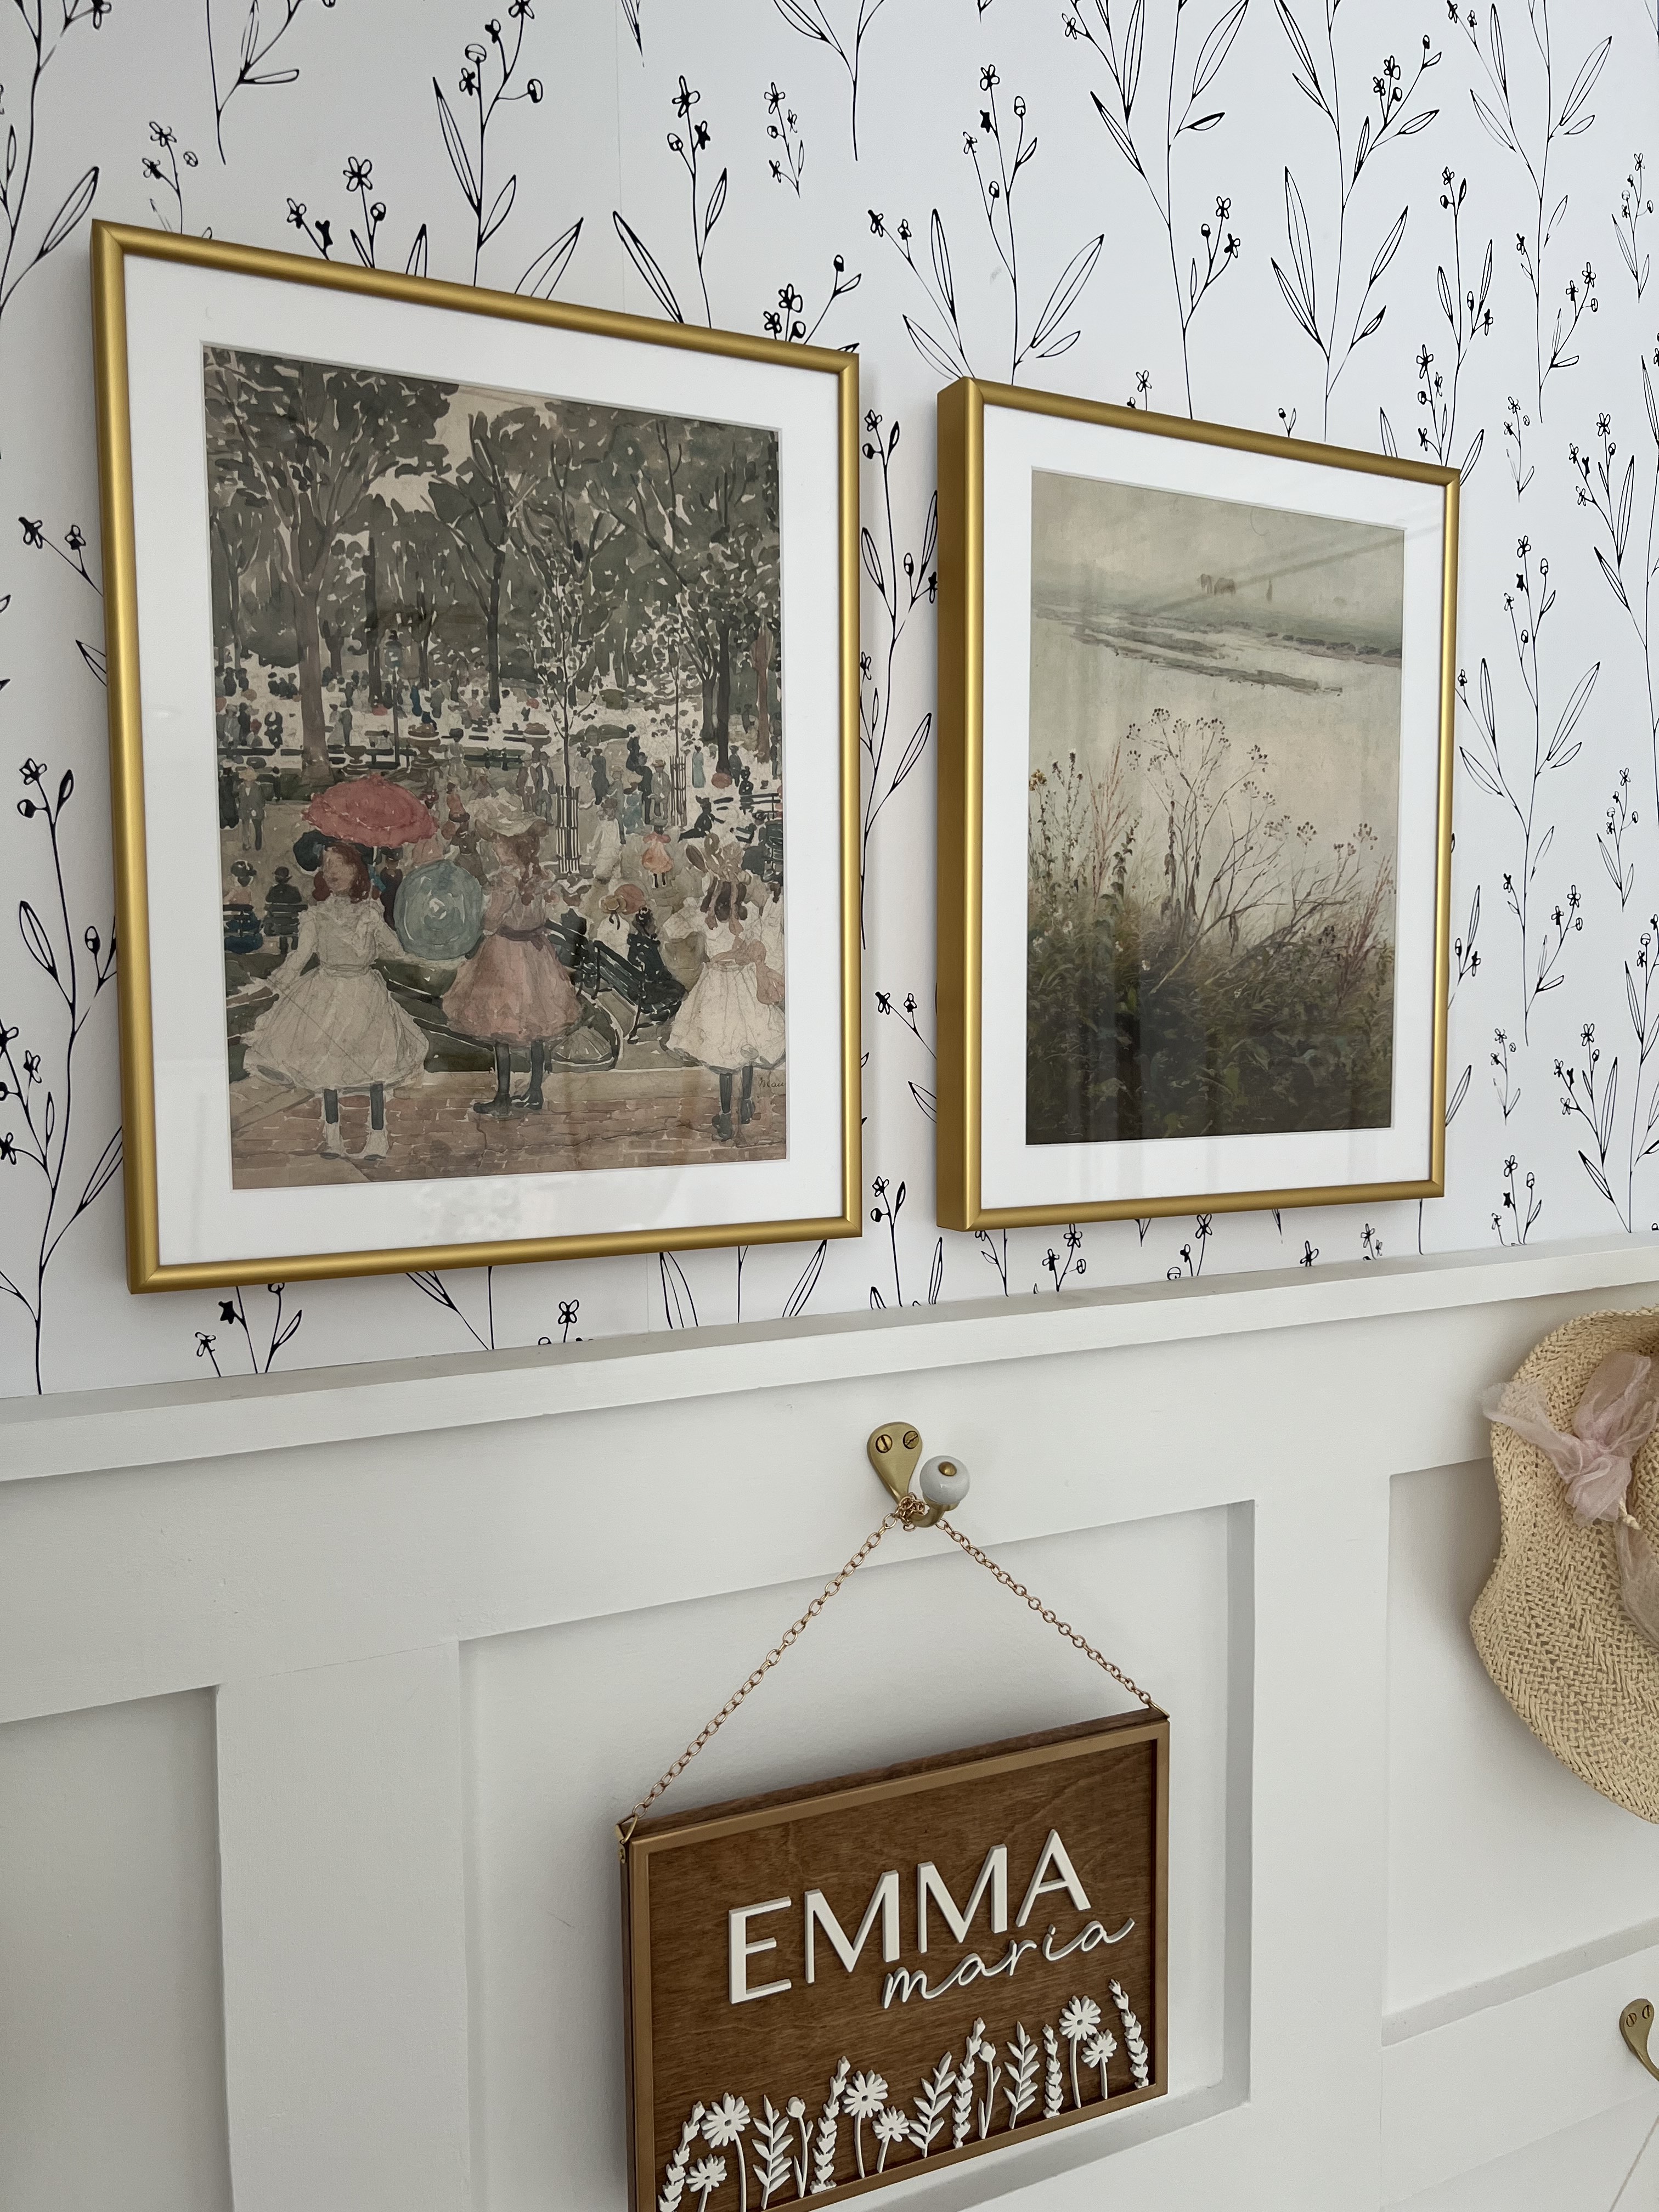 Genius Airbnb Design Tips: Framed art with wallpaper